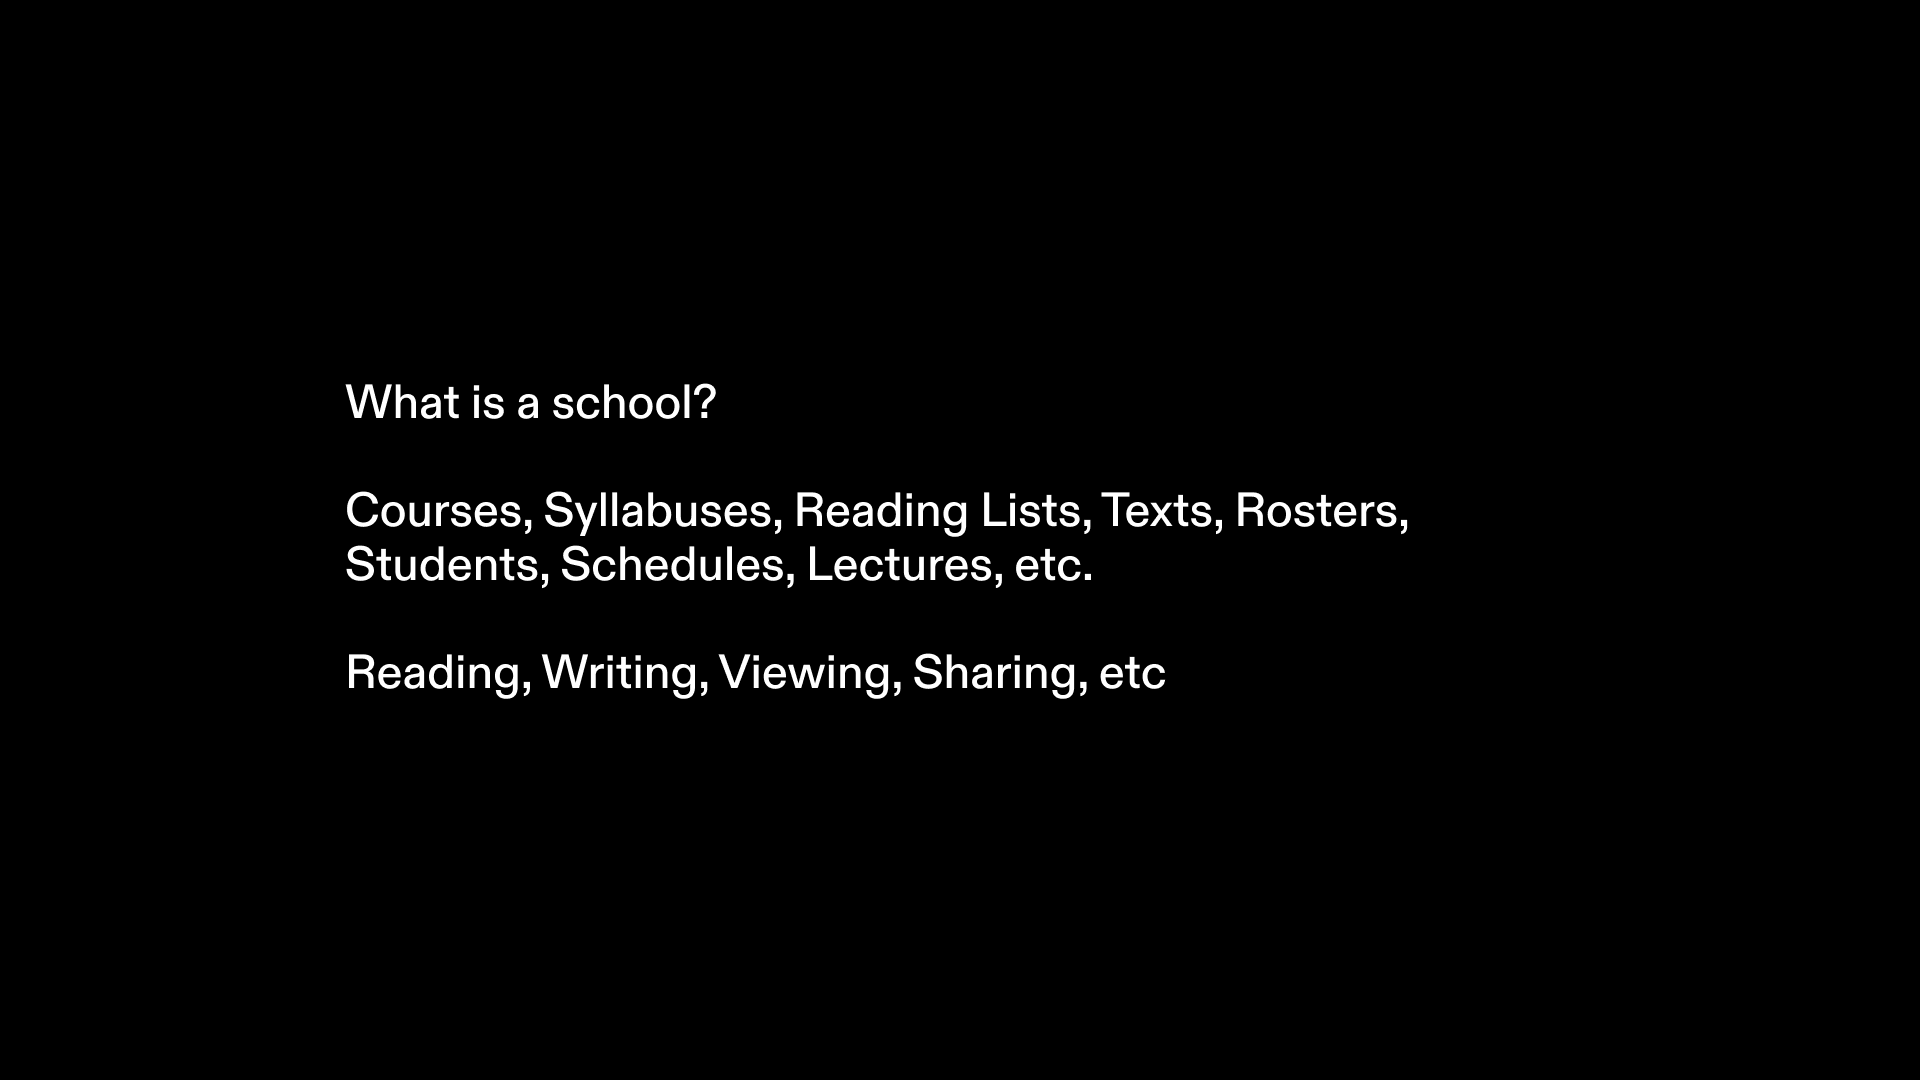 What is a school?